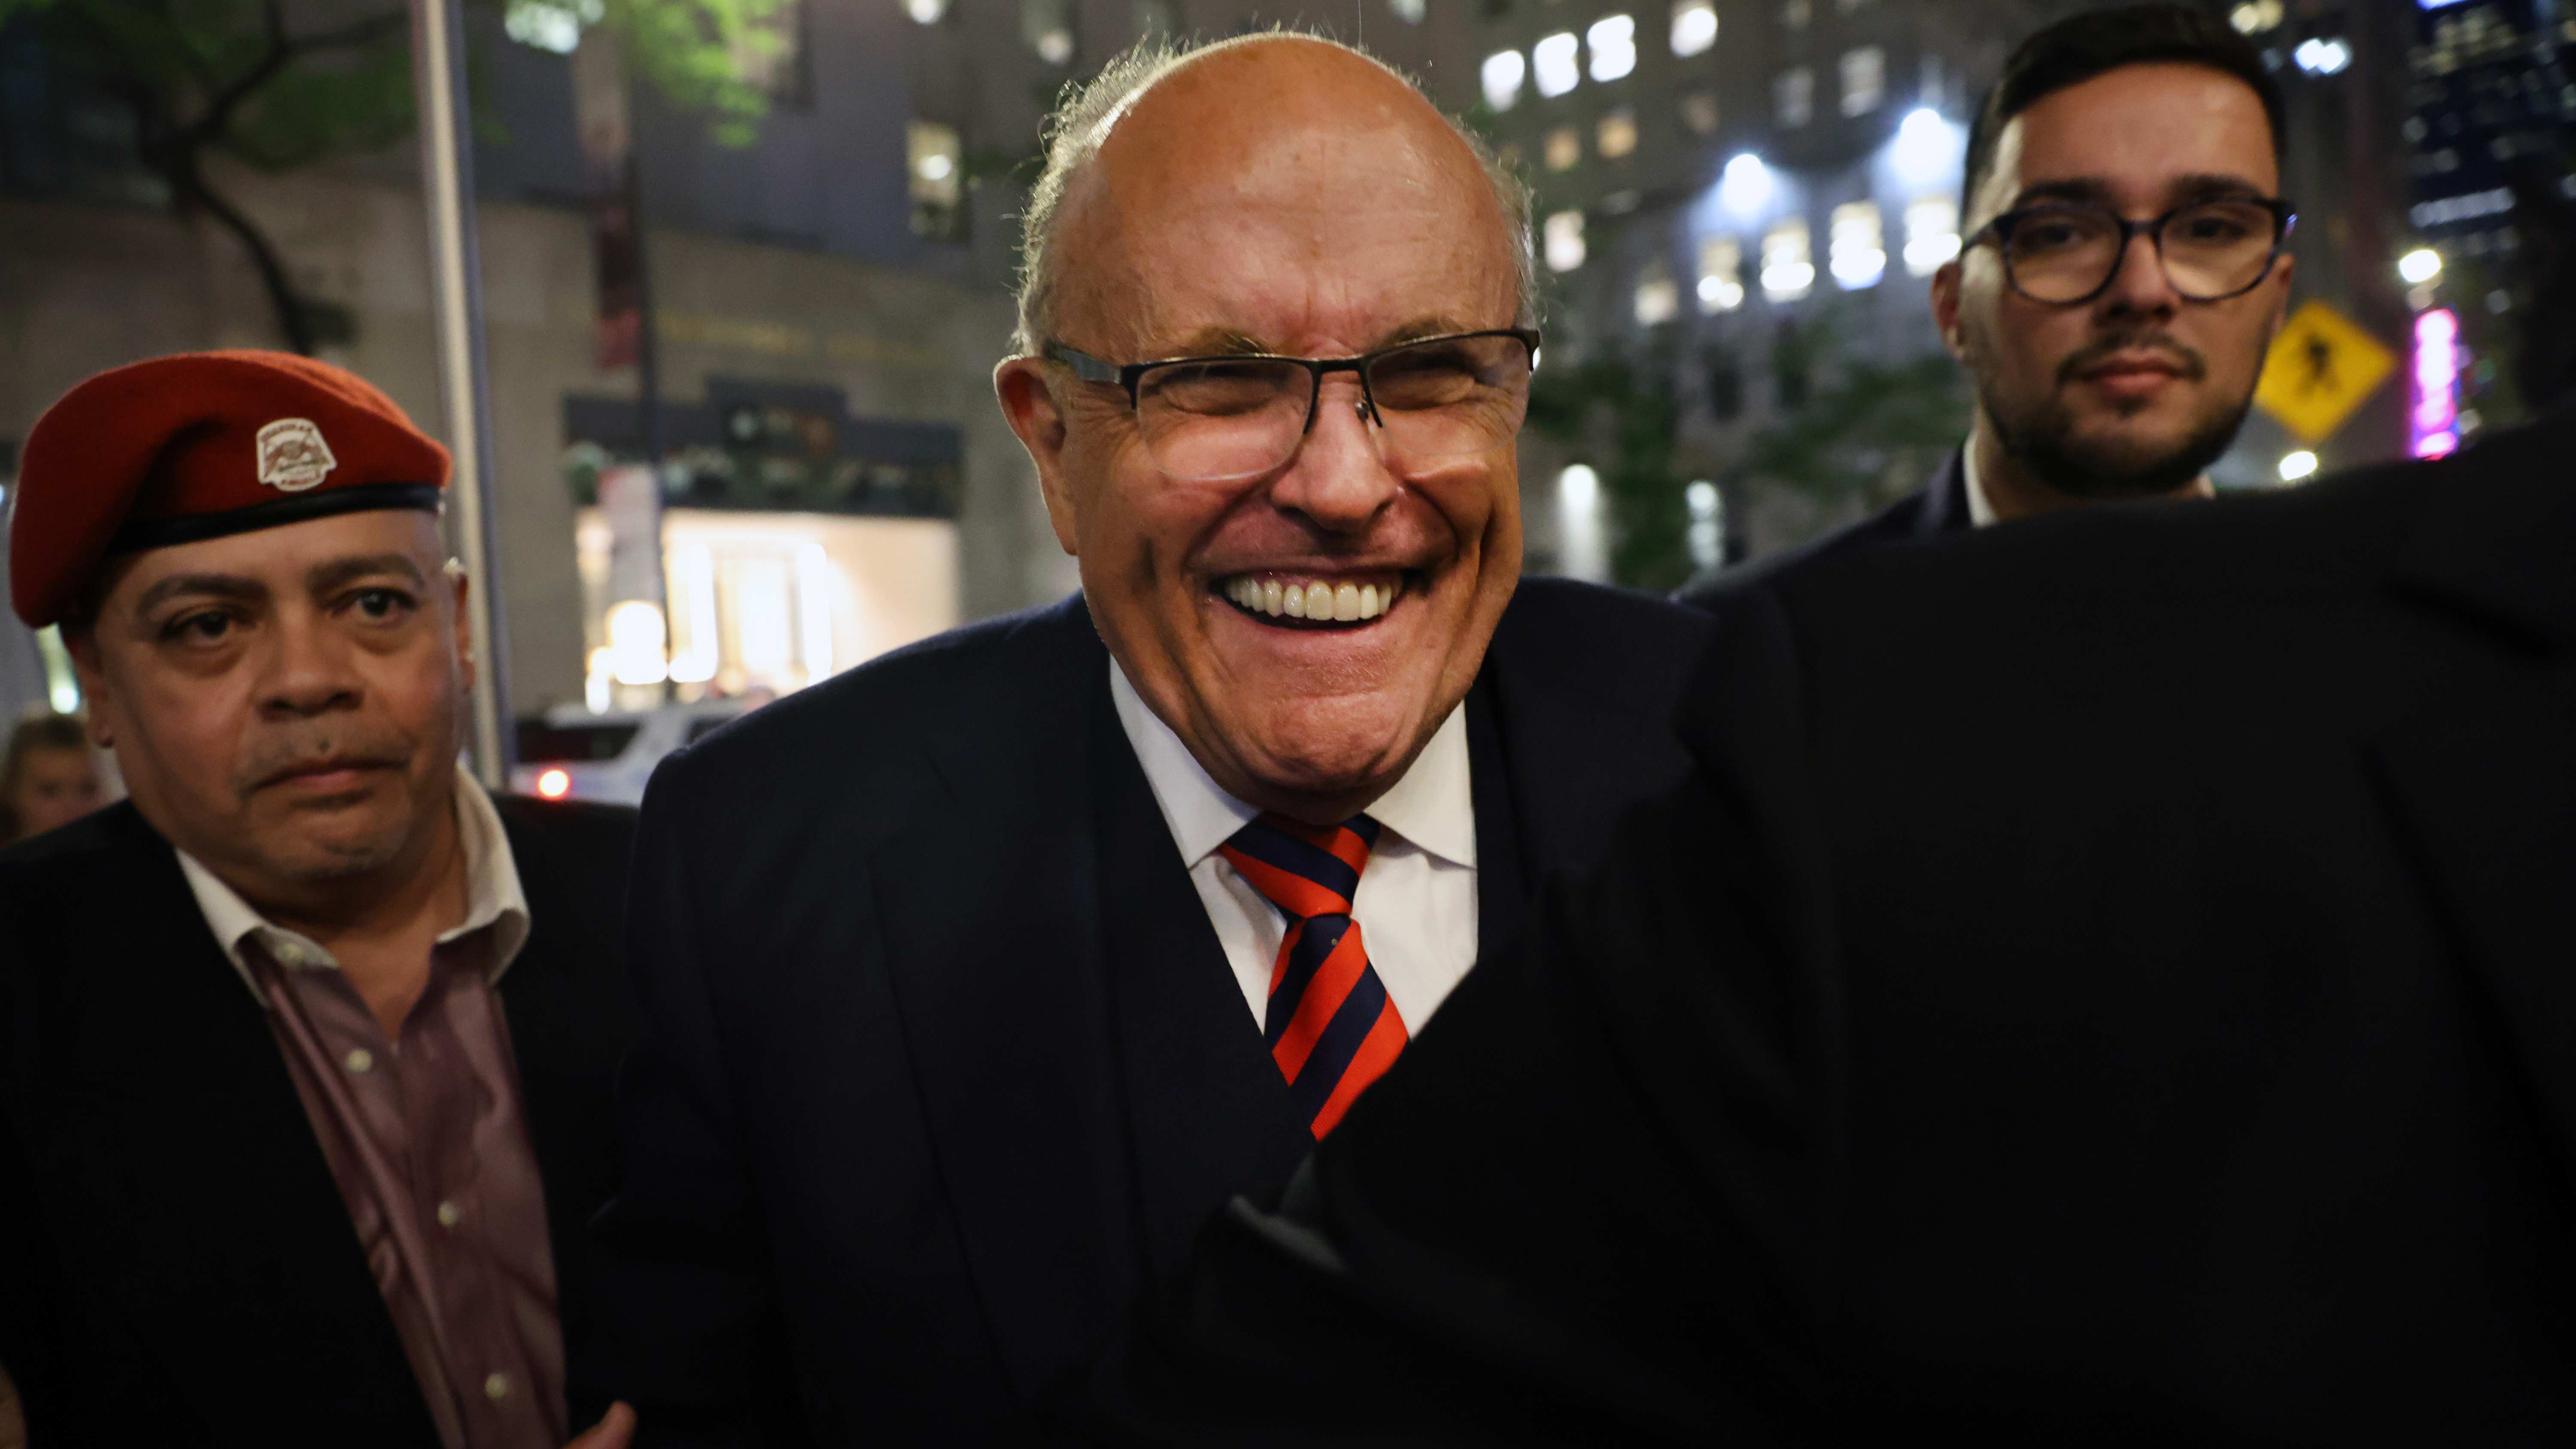 Man who was charged for slapping Rudy Giuliani on the back files $2 million lawsuit